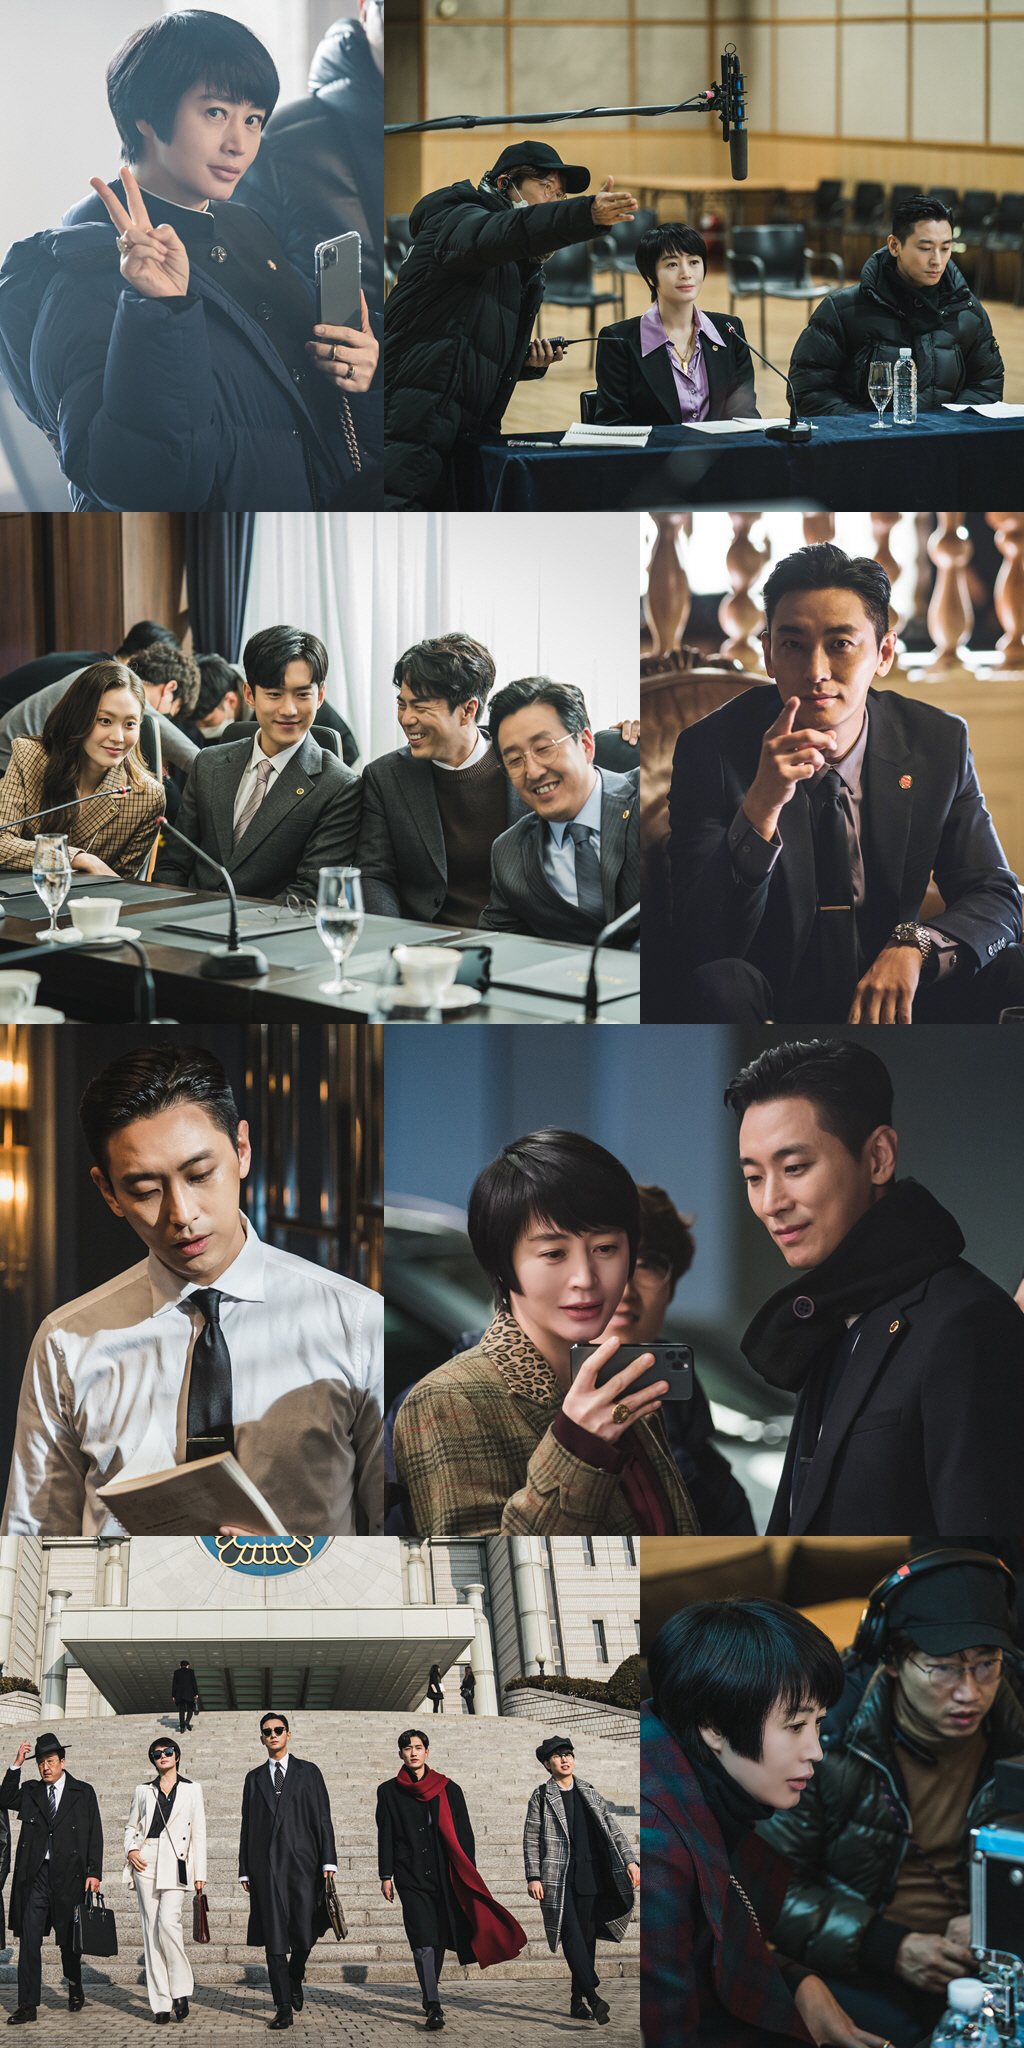 Hyena ahead of End has unveiled behind-the-scenes cutSBS gilt drama Hyena [playplayed by Kim Ru-ri/directed by Jang Tae-yu/production Keith (CEO Park Sung-hye)] leaves only two times to End.The two hyena lawyers, Kim Hye-soo and Ju Ji-hoon, who were growling and fighting every time they met, became perfect partners who trust and rely on each other, and they raise questions until the end, foreshadowing the war against the public enemy Song Pil-jung (Lee Kyung-young).In the meantime, Hyena enthusiastic viewers are waiting for the next episode, but they are sorry.Because it is Hyena who showed the reversal of the reversal so far, I do not want to leave Hyena lawyers who are so attractive even though I wonder how to finish the remaining two times.The production team of Hyena released a behind-the-scenes cut on April 7 to appease Ends regret.The photo shows a cast of Hyena, which shows another charm with Drama.Above all, their cheerful atmosphere attracts attention.Whether you are alone or with others, the warm appearance of the always smiling Hyena Actors makes you guess the pleasant atmosphere of the filming scene.I can feel the atmosphere of their teamwork, which showed their breathing together as a team H.In addition, they see their passion for acting in the way they watch or monitor the script.Before shooting, I am carefully examining the script, checking the smoke with monitoring after shooting, and trying to make a perfect scene.Hyena production team said, All Actors, including Kim Hye-soo and Ju Ji-hoon, have transferred 200% to their characters at the shooting site, so Wellmade Drama was born.I am grateful to Actors who laughed together, cared for each other and finished shooting safely.  I hope you will expect the remaining two times of Hyena, which is full of sweat and enthusiasm. SBS Hyena 15th SBS drama Hyena will be broadcasted at 10 pm on April 10th.Photo Offering: SBS Hyena